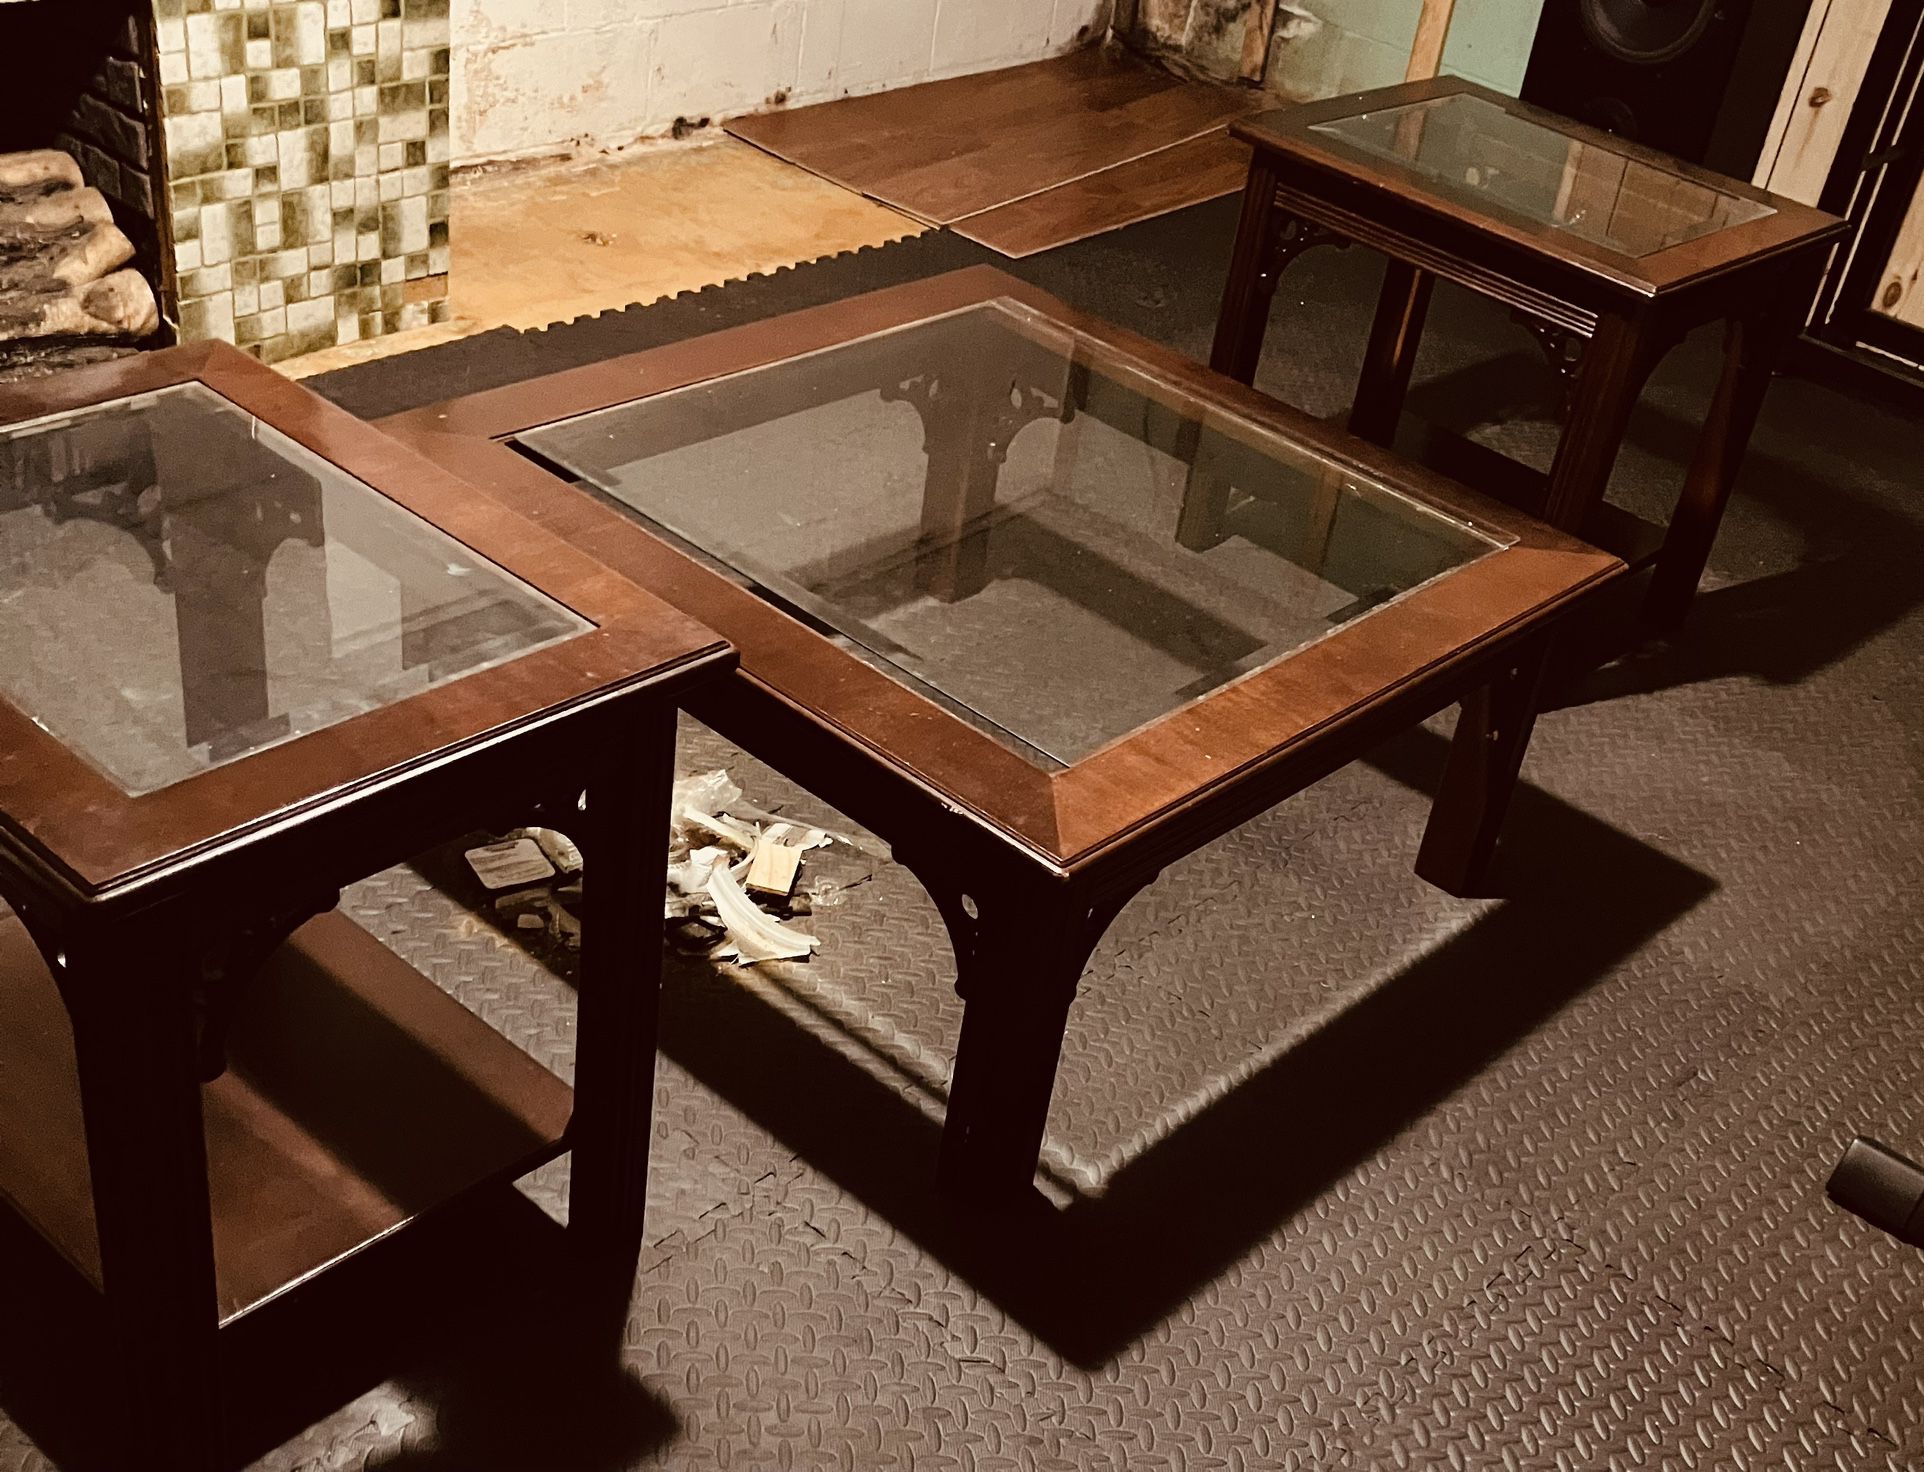 Nice Coffee Table And End Tables Set**Gone By Today**